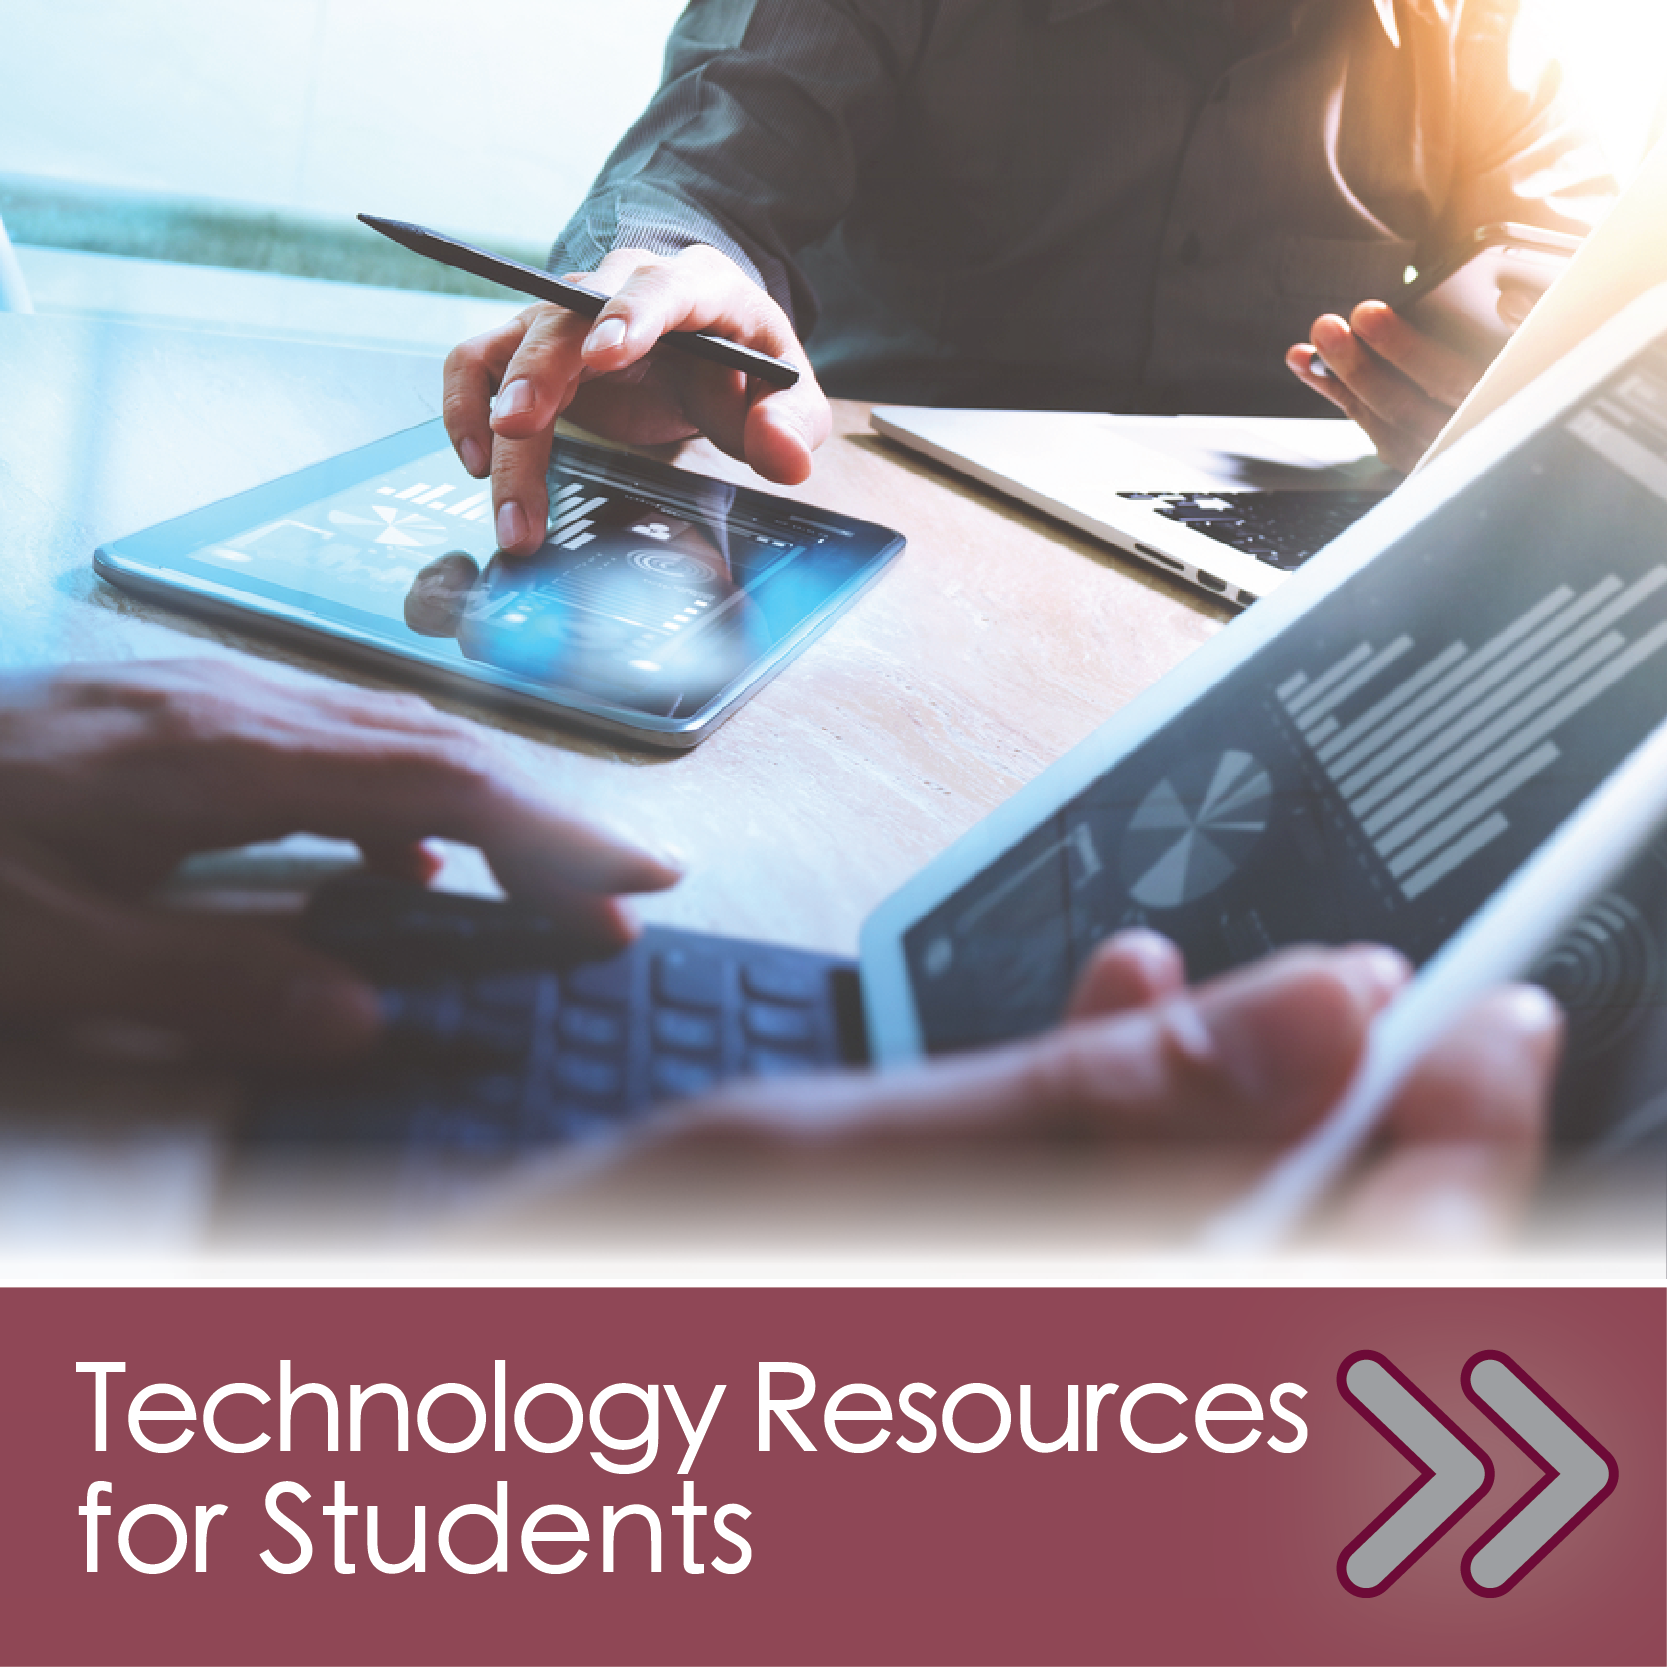 Technology Resources for Students